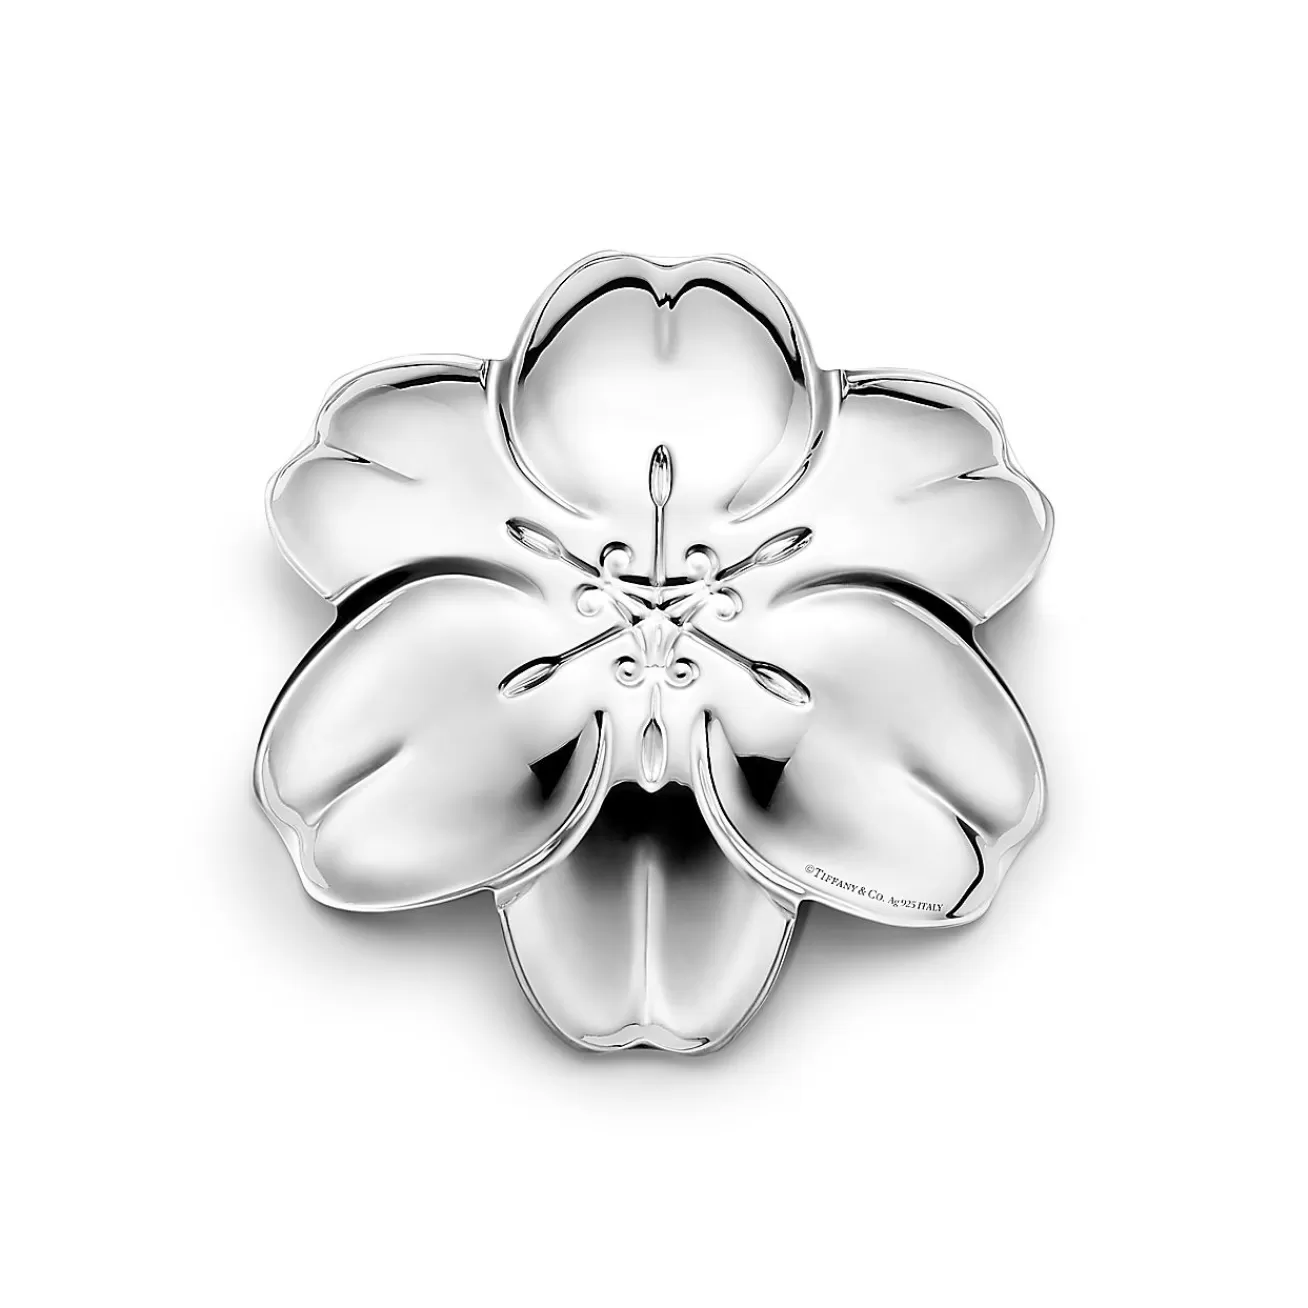 Tiffany & Co. Tiffany Home Essentials Tulip Vide Poche in Sterling Silver | ^ The Home | Housewarming Gifts